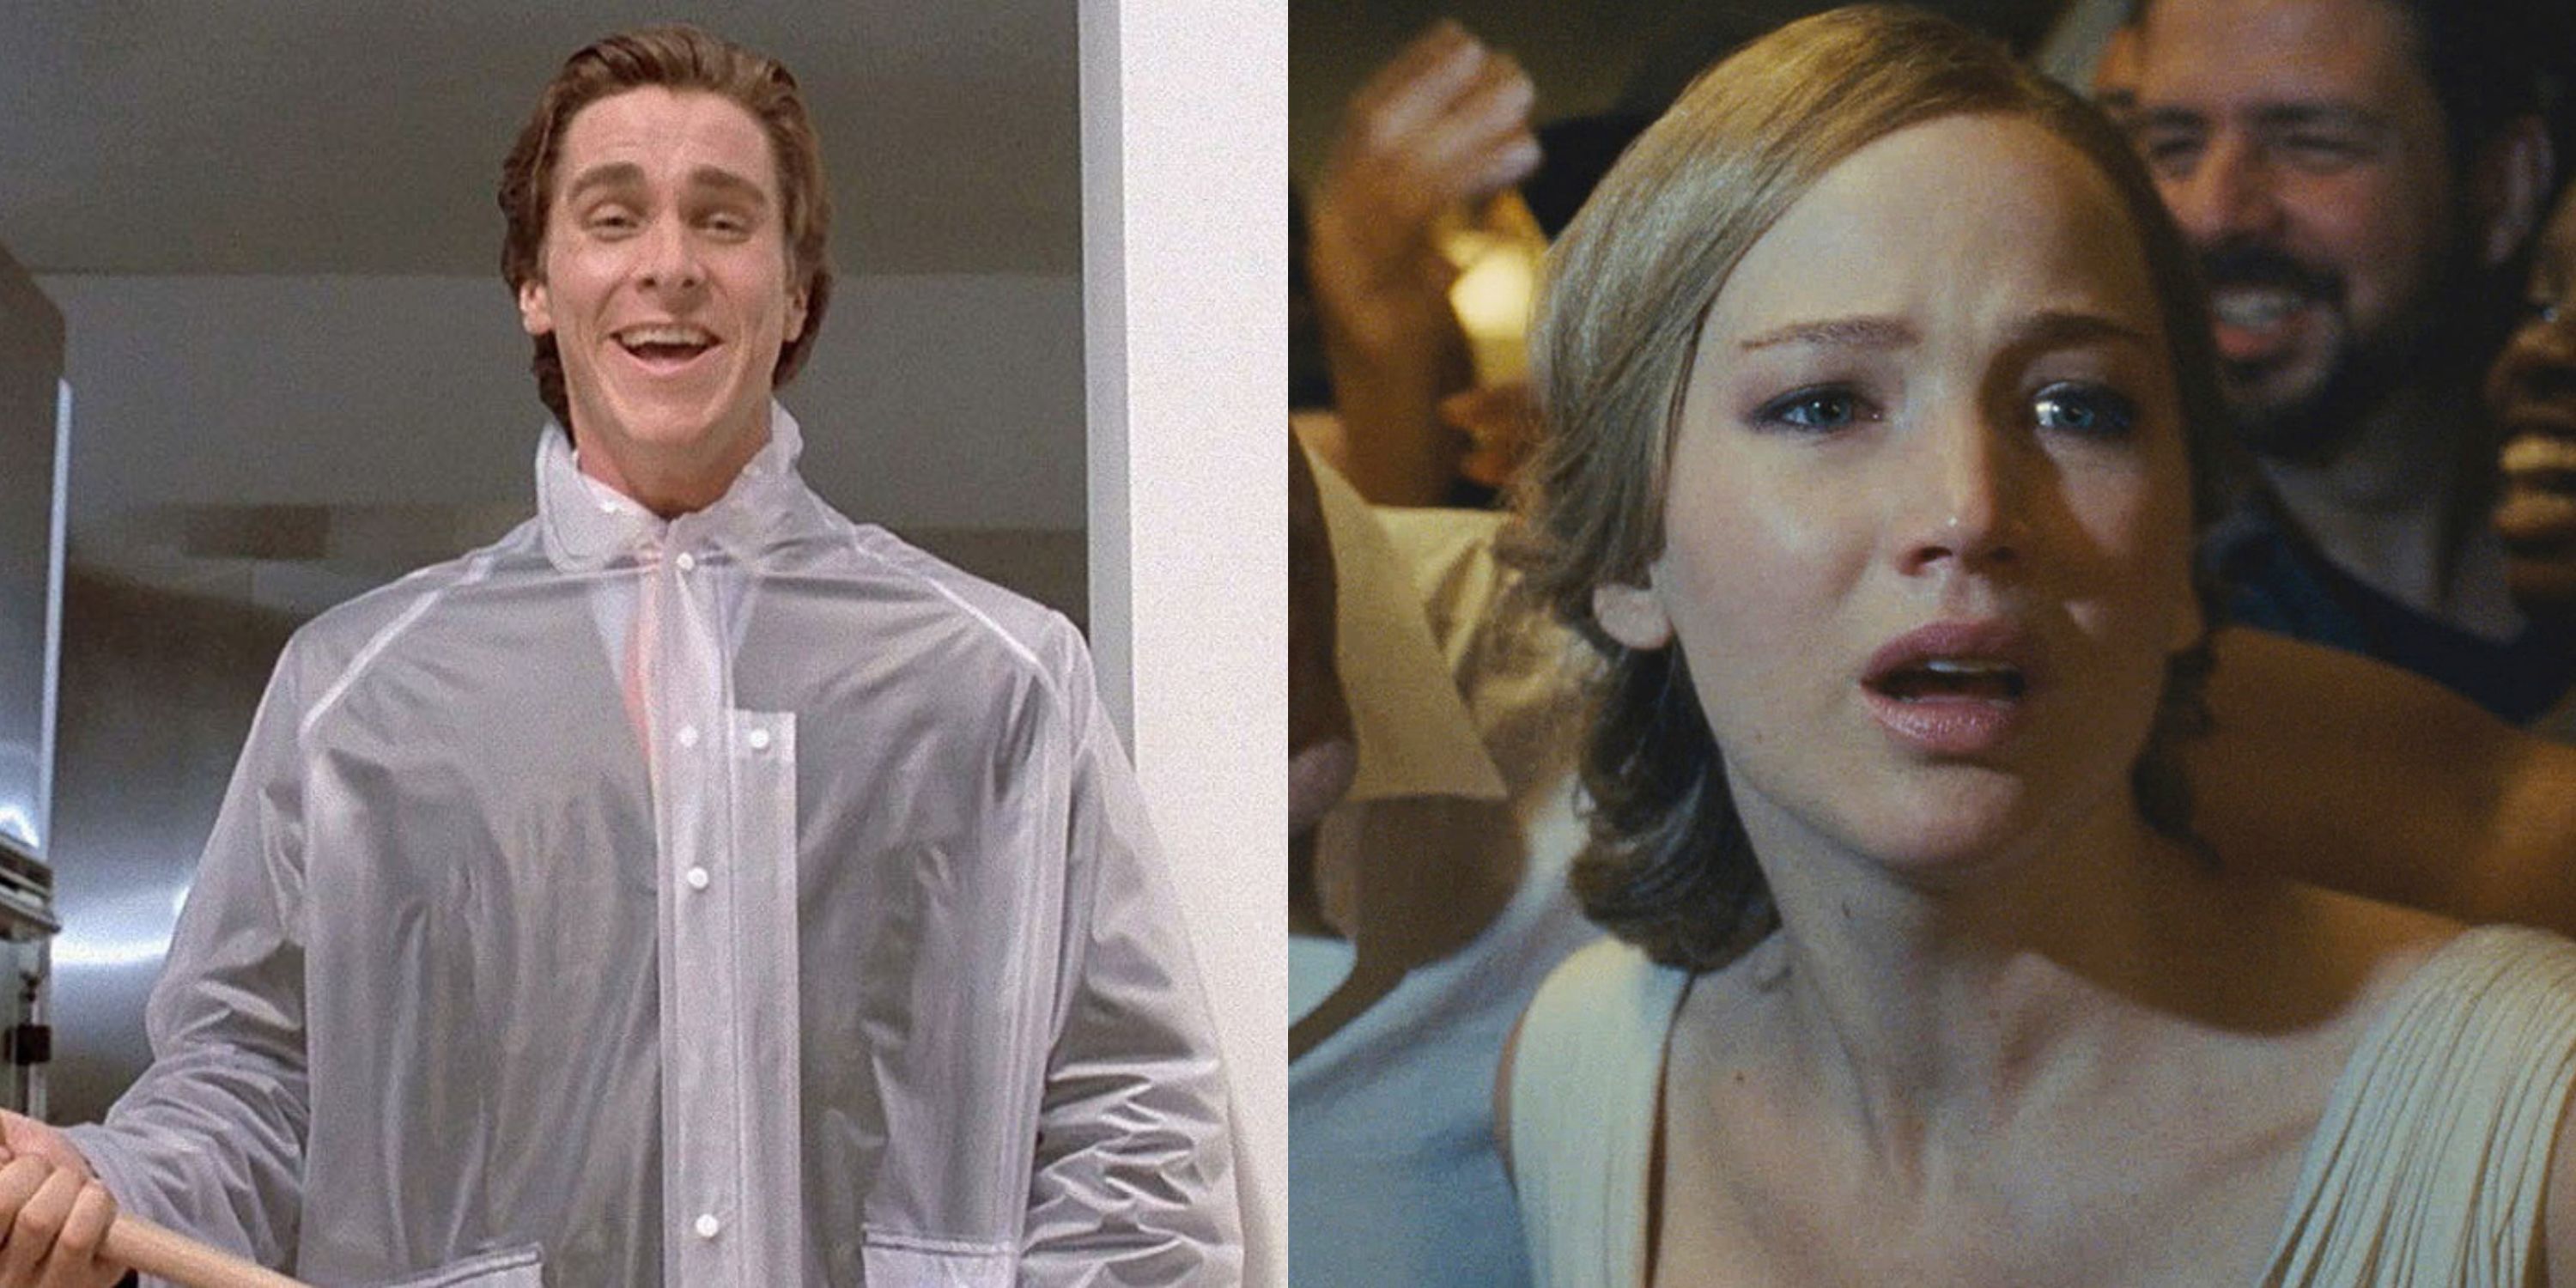 Featured image Christian Bale in American Psycho and Jennifer Lawrence in Mother!